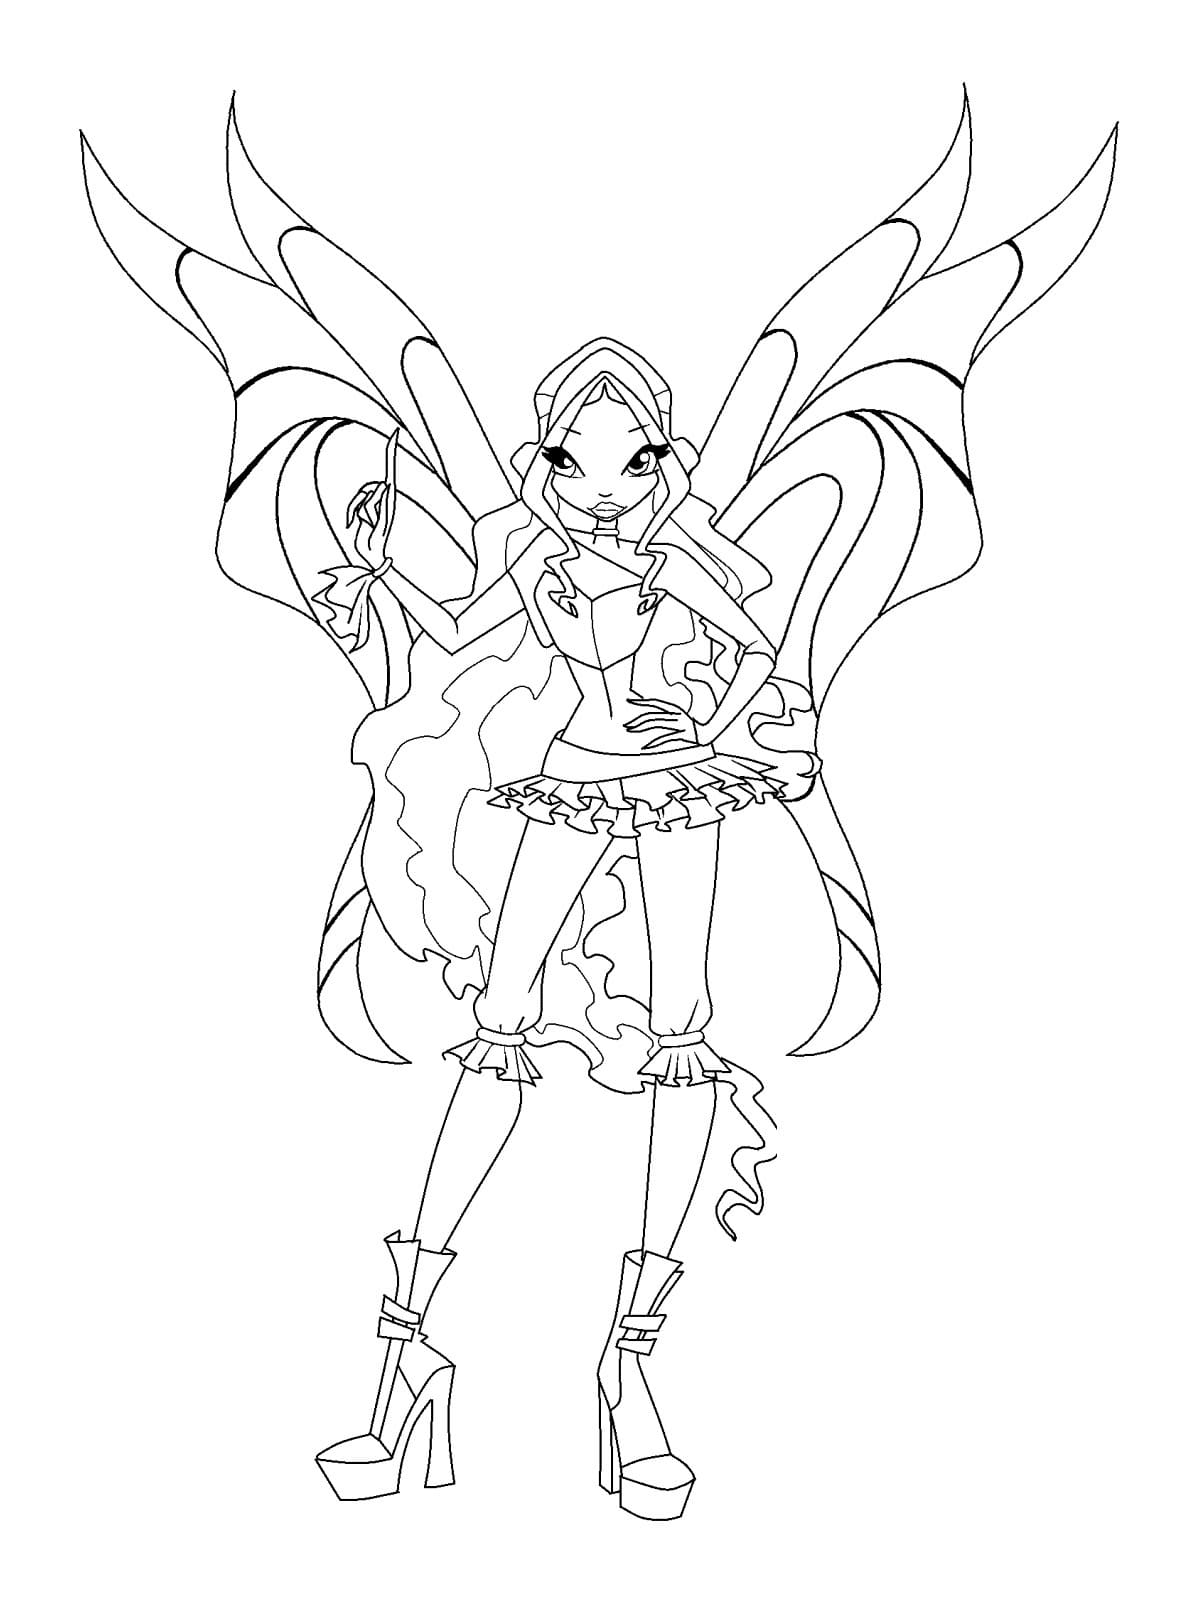 Layla Winx coloring page